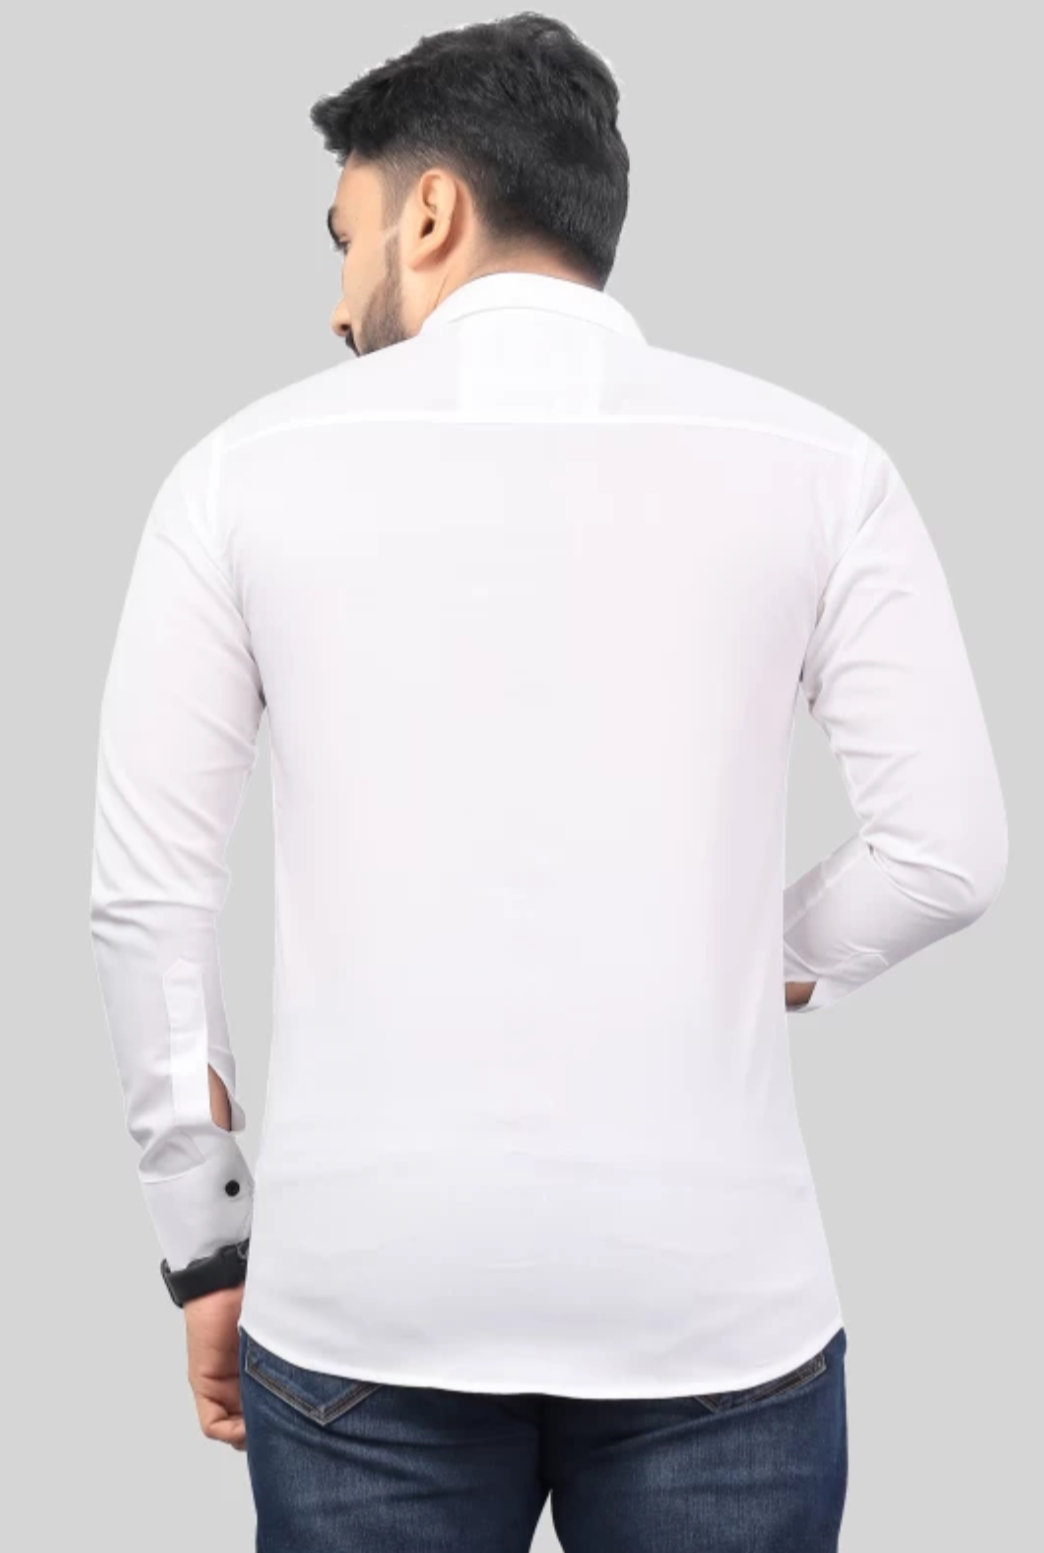 Men Solid Casual White Shirt - White, M, Fabric- Poly cotton